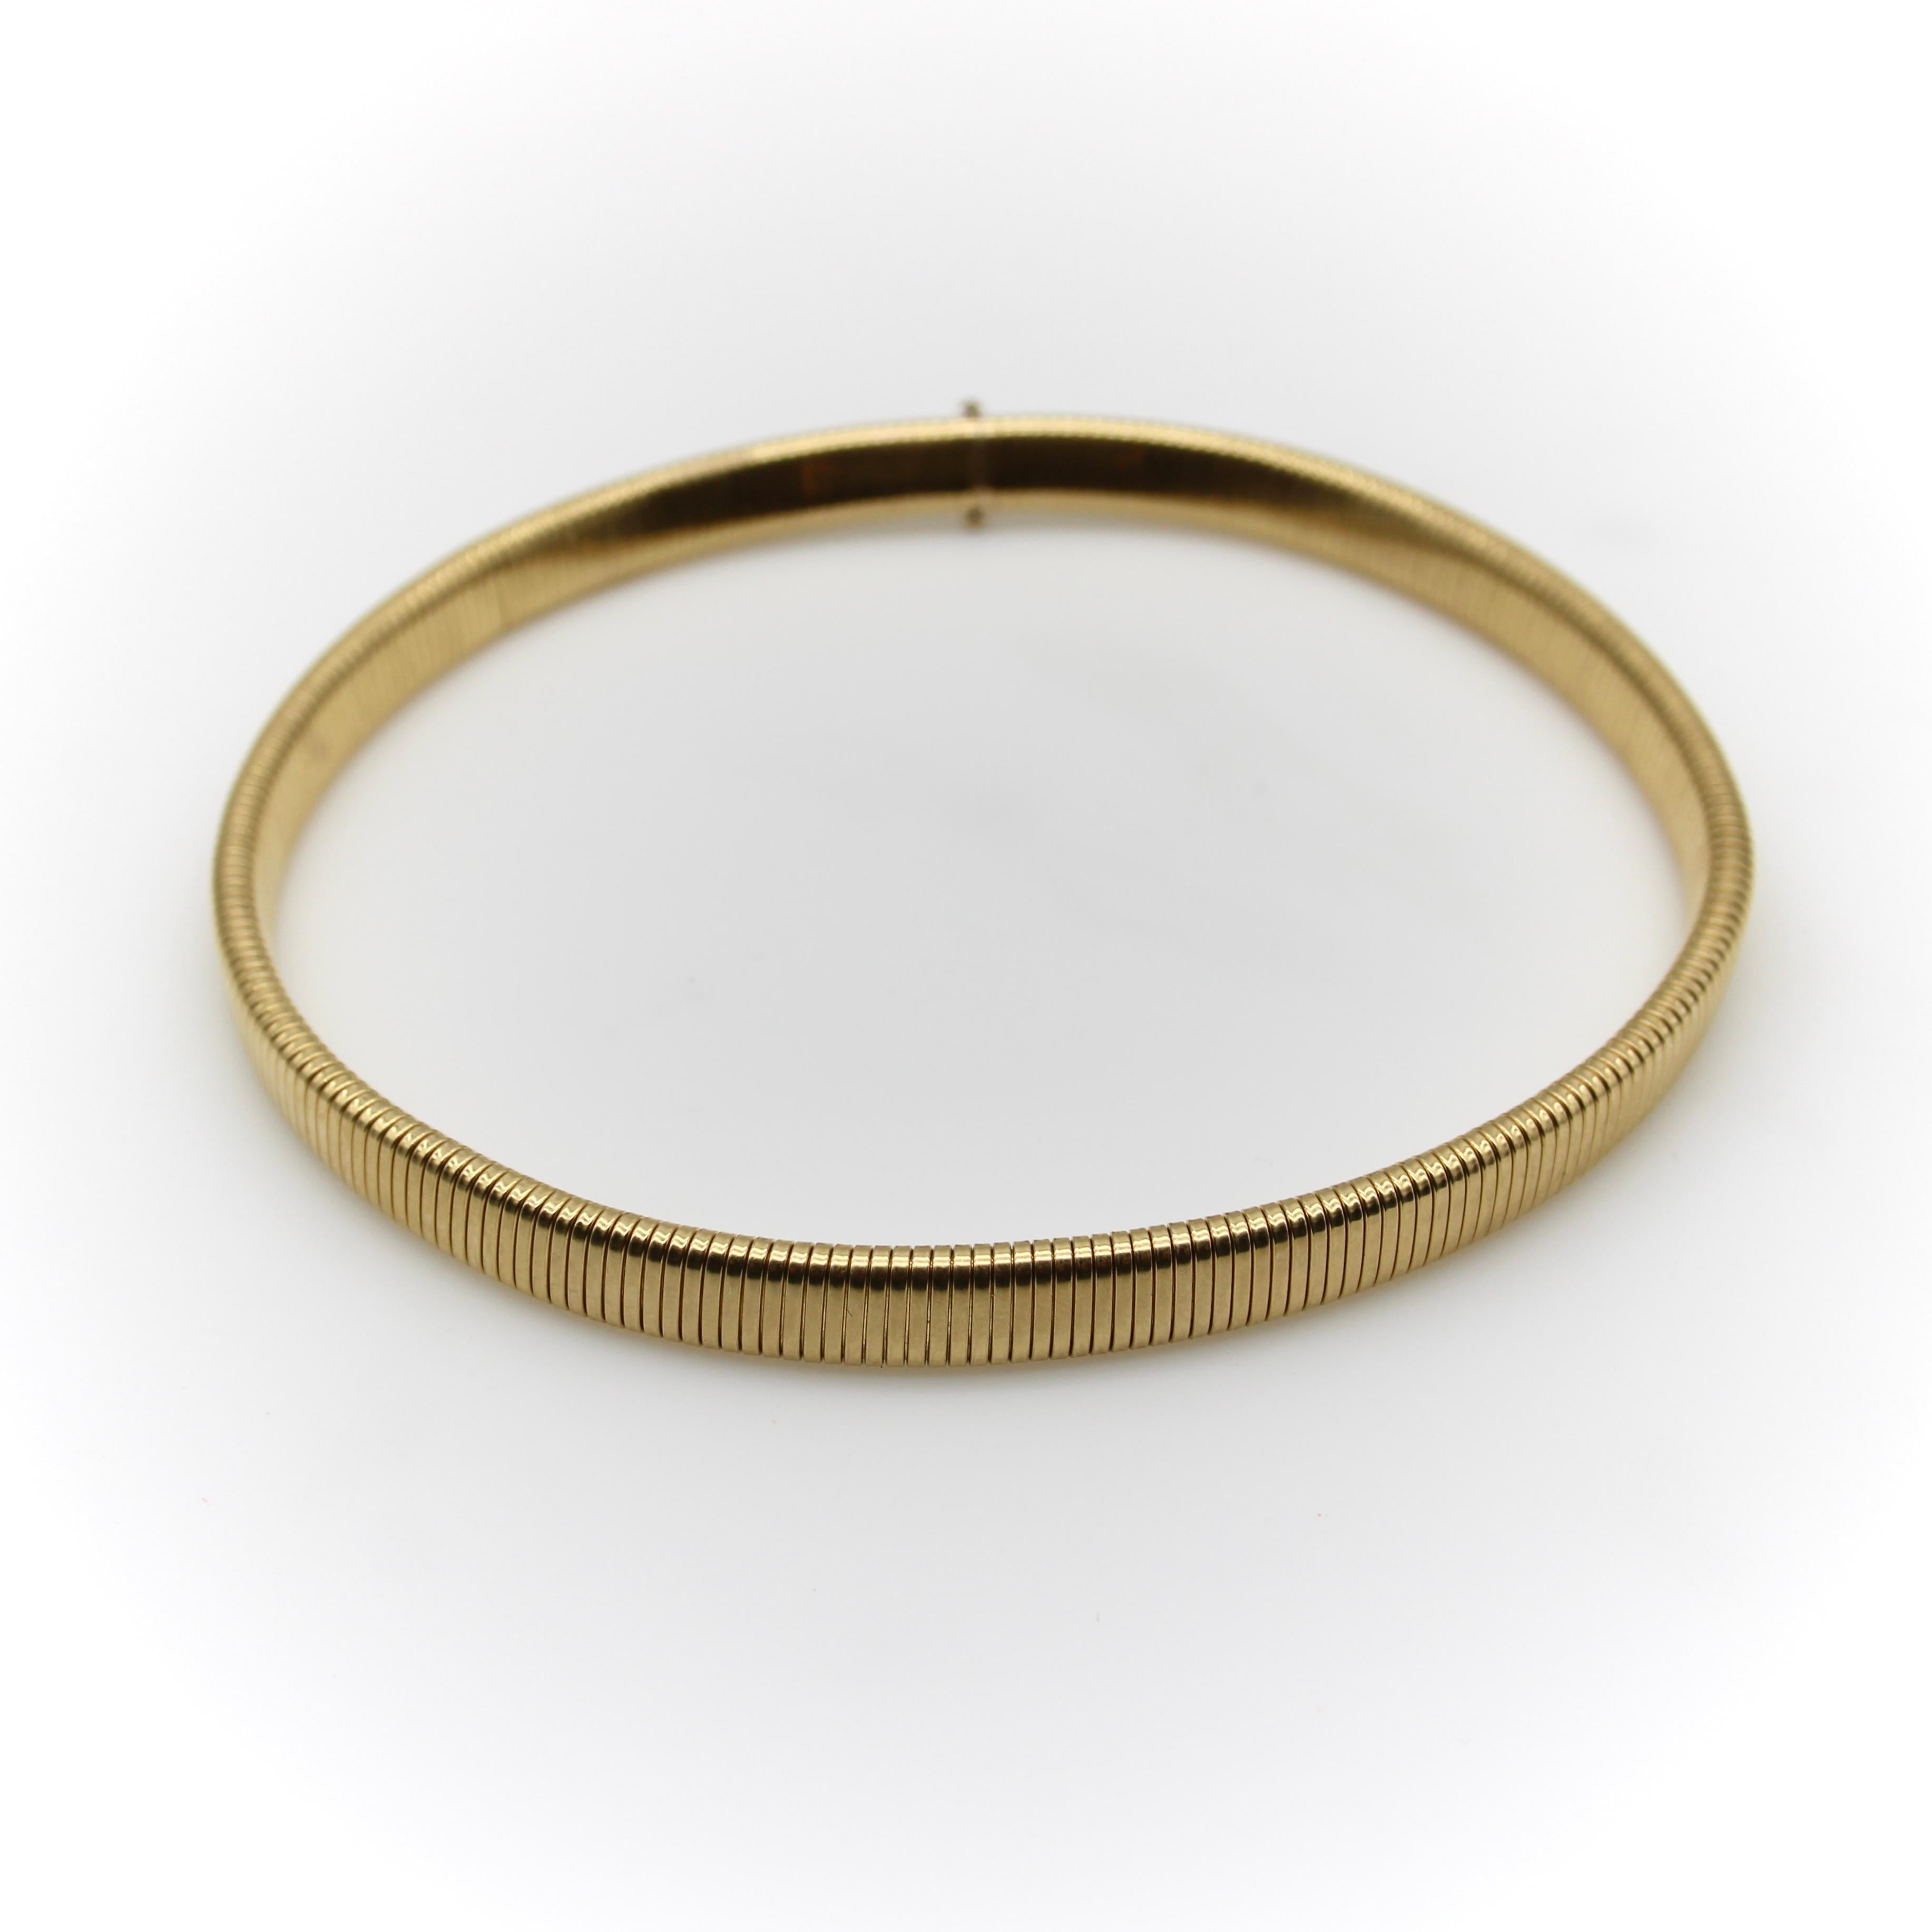 Circa the 1970’s, this 14k gold necklace is a revival of a World War II era  jewelry making technique called tubogas. A hollow, flexible tube consisting of interlocking gold links makes for a fun and interesting necklace with a springlike quality